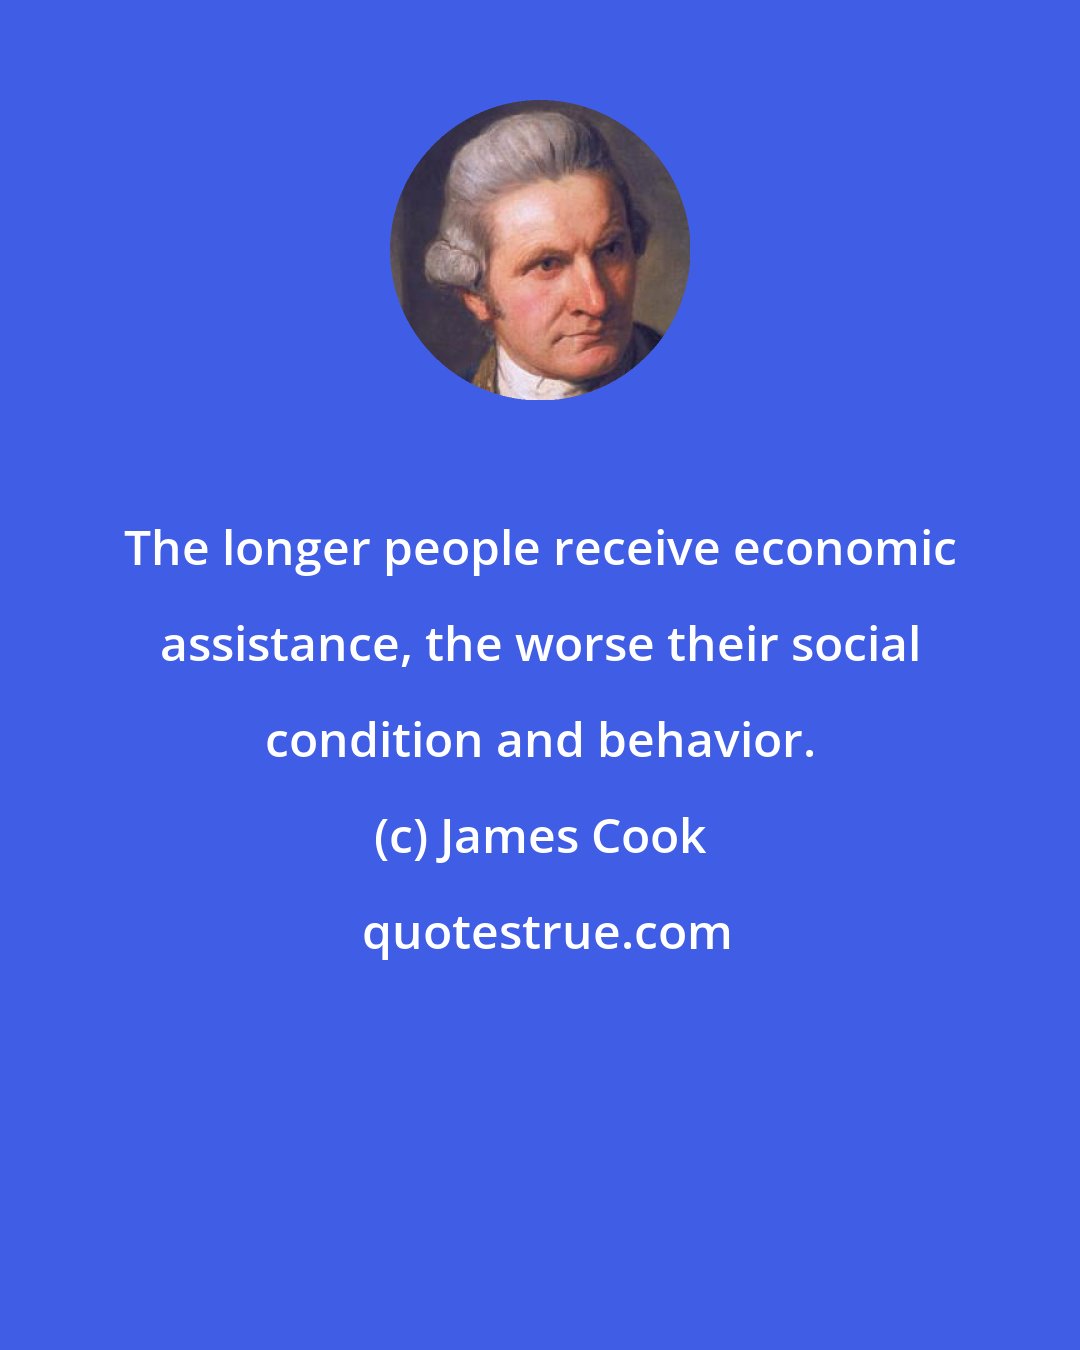 James Cook: The longer people receive economic assistance, the worse their social condition and behavior.